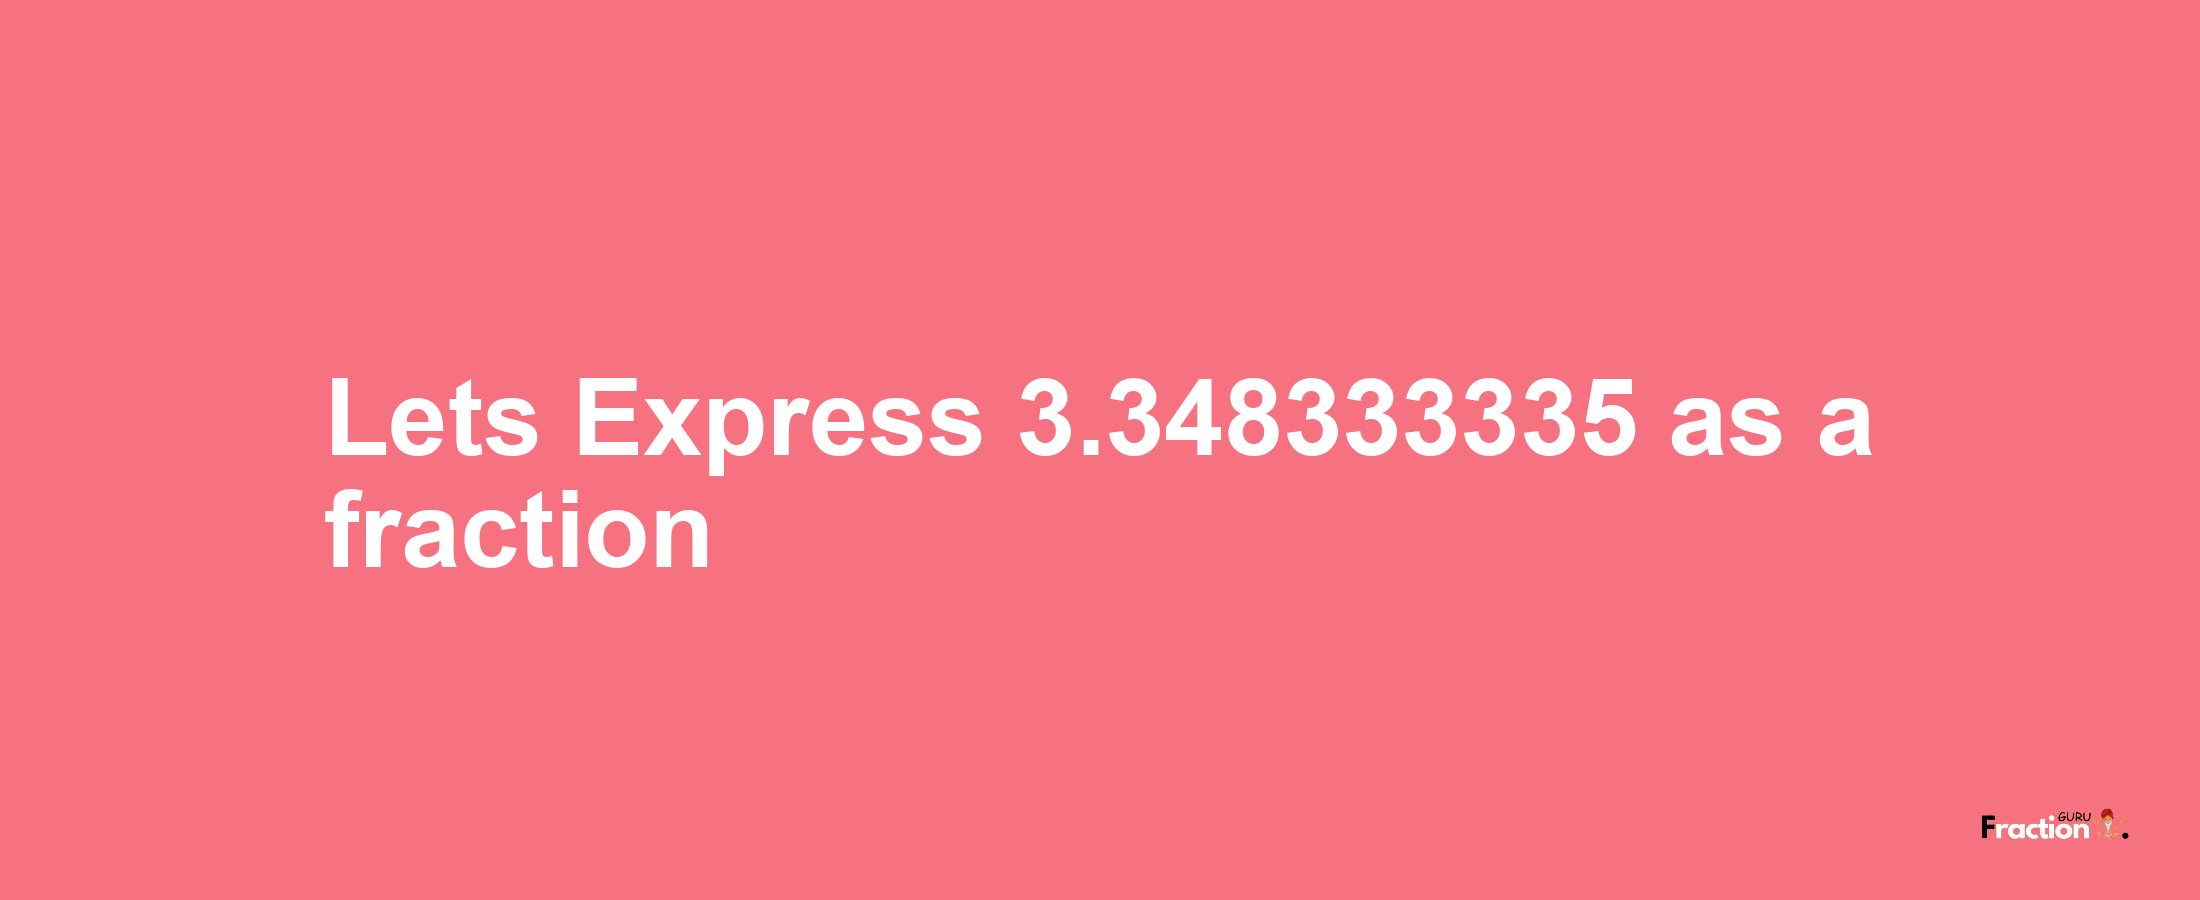 Lets Express 3.348333335 as afraction